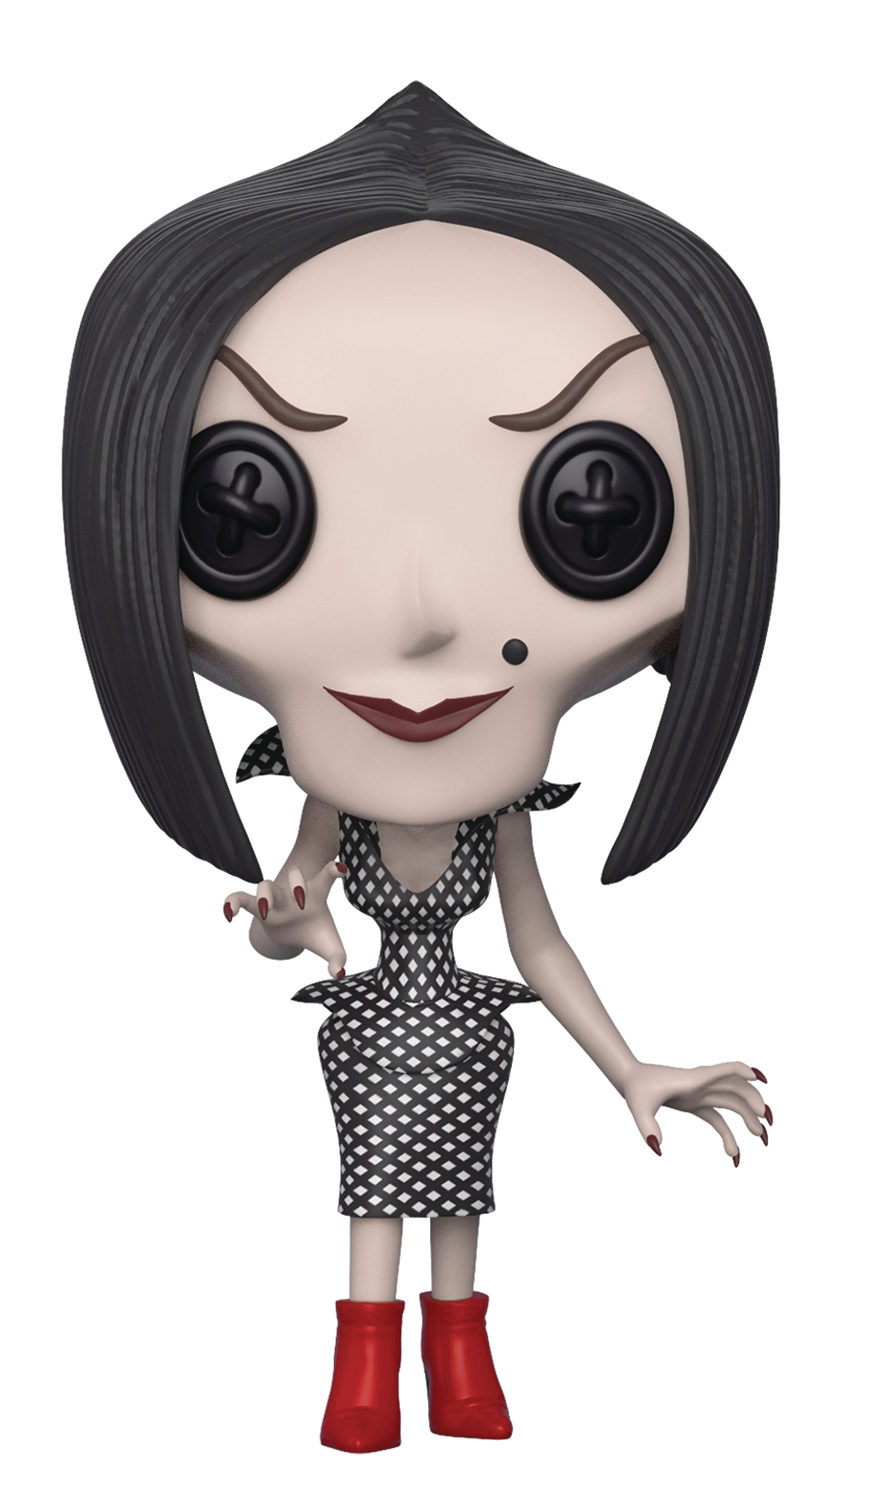 coraline characters other mother